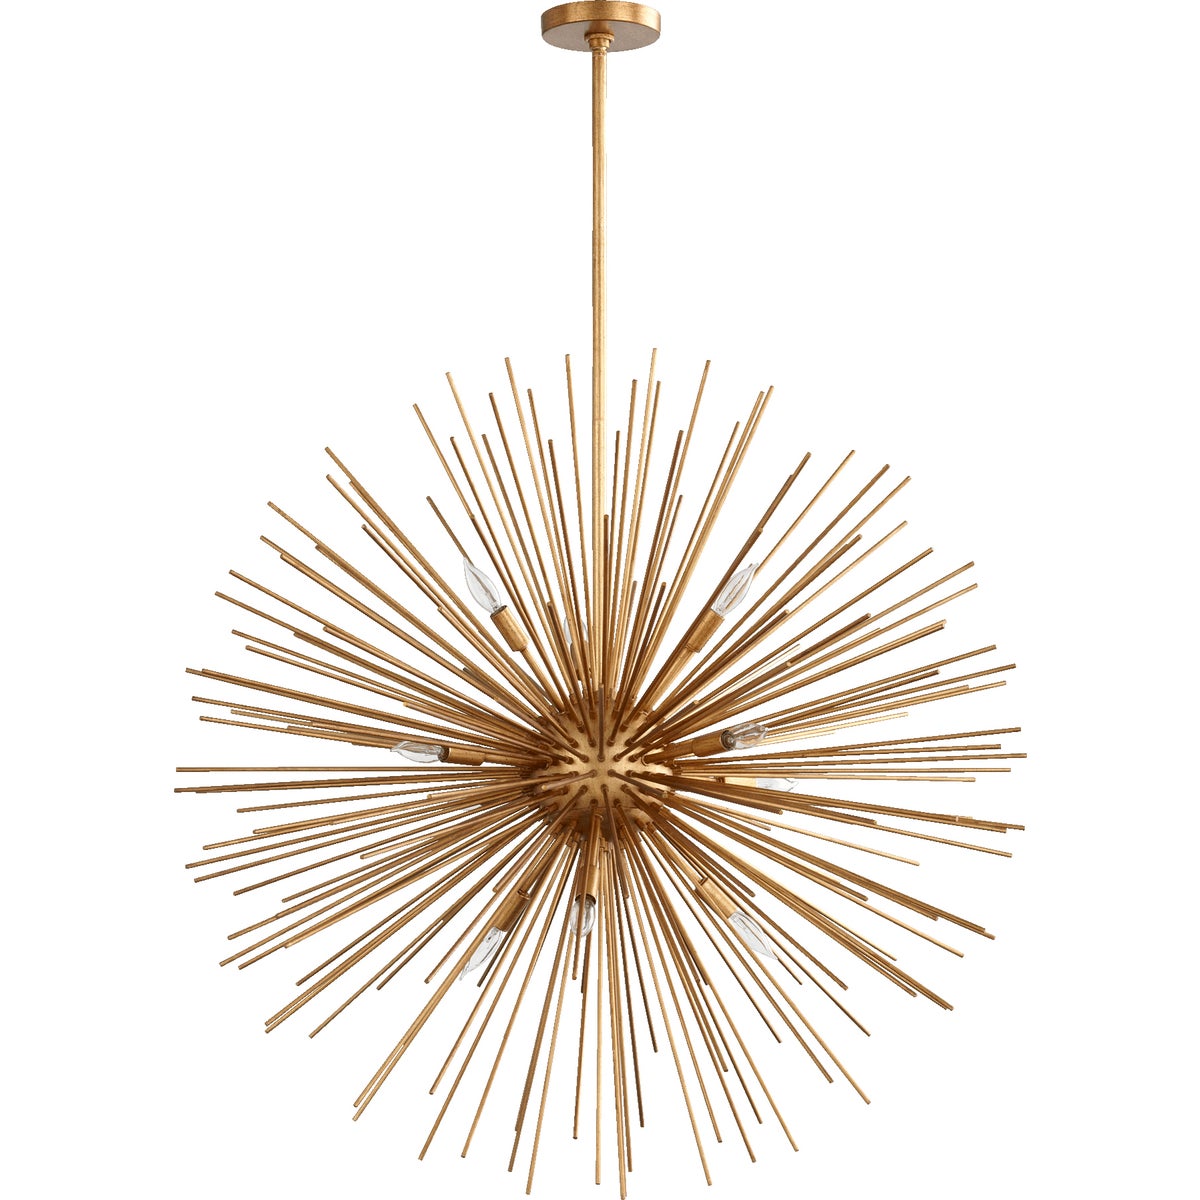 Modern Pendant Light: A gold chandelier with many lights, resembling an electrified dandelion. Creates a stunning focal point with burst of gold leaf spires and candelabra lighting.